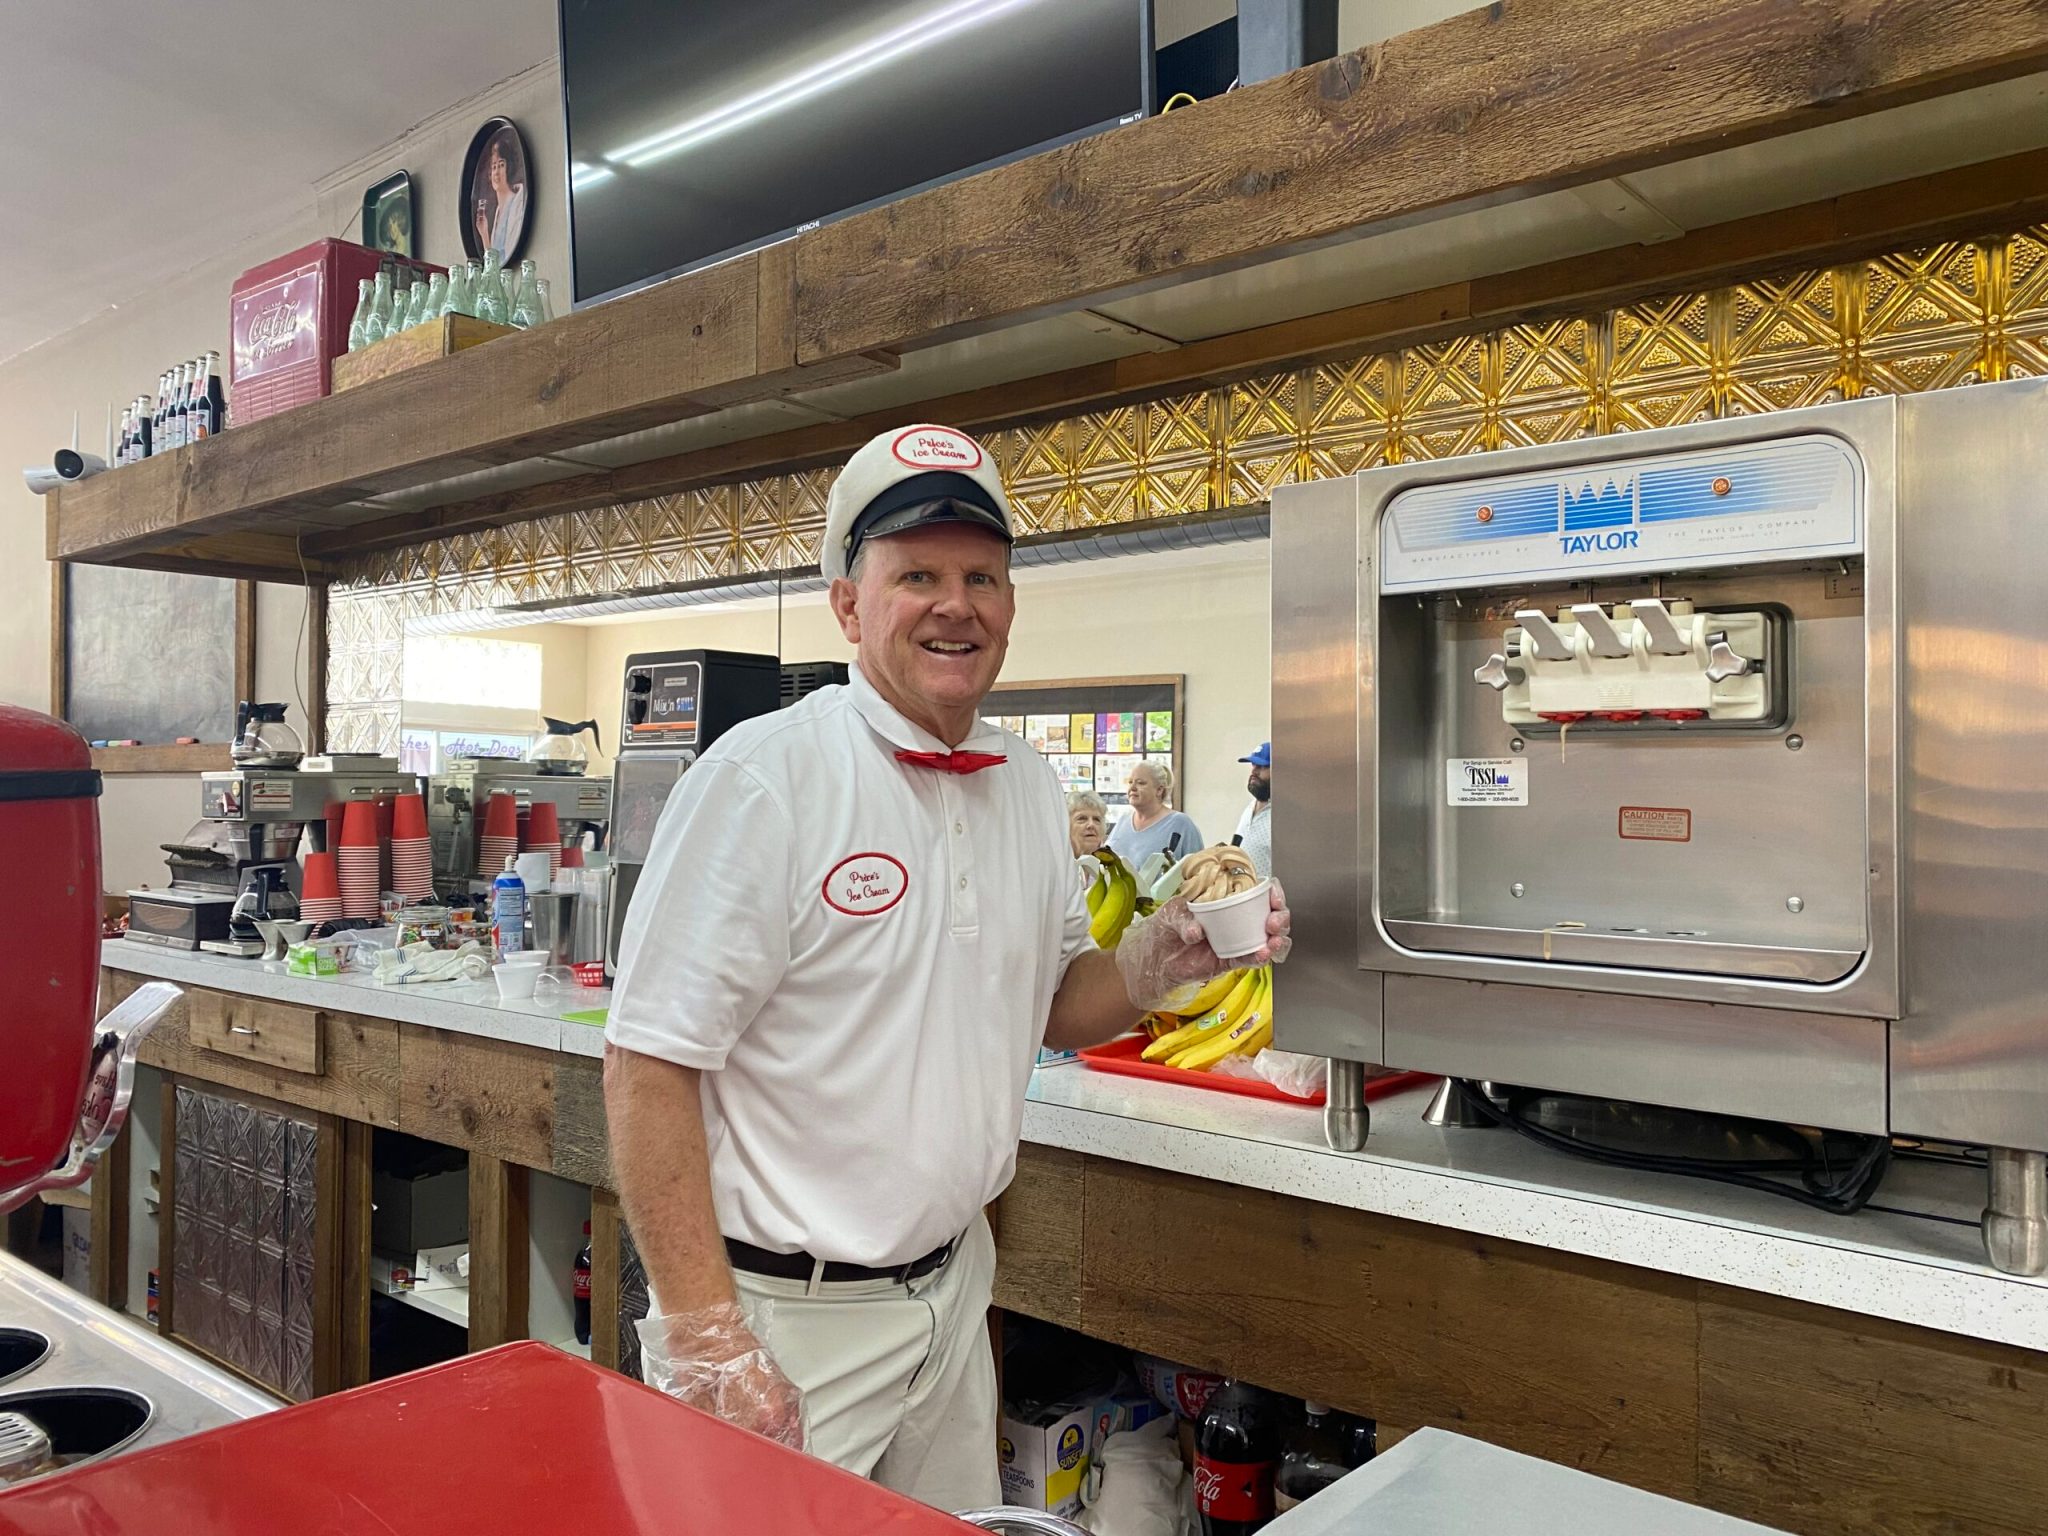 Kevin Nelson, the owner of Price's. New Birmingham opening